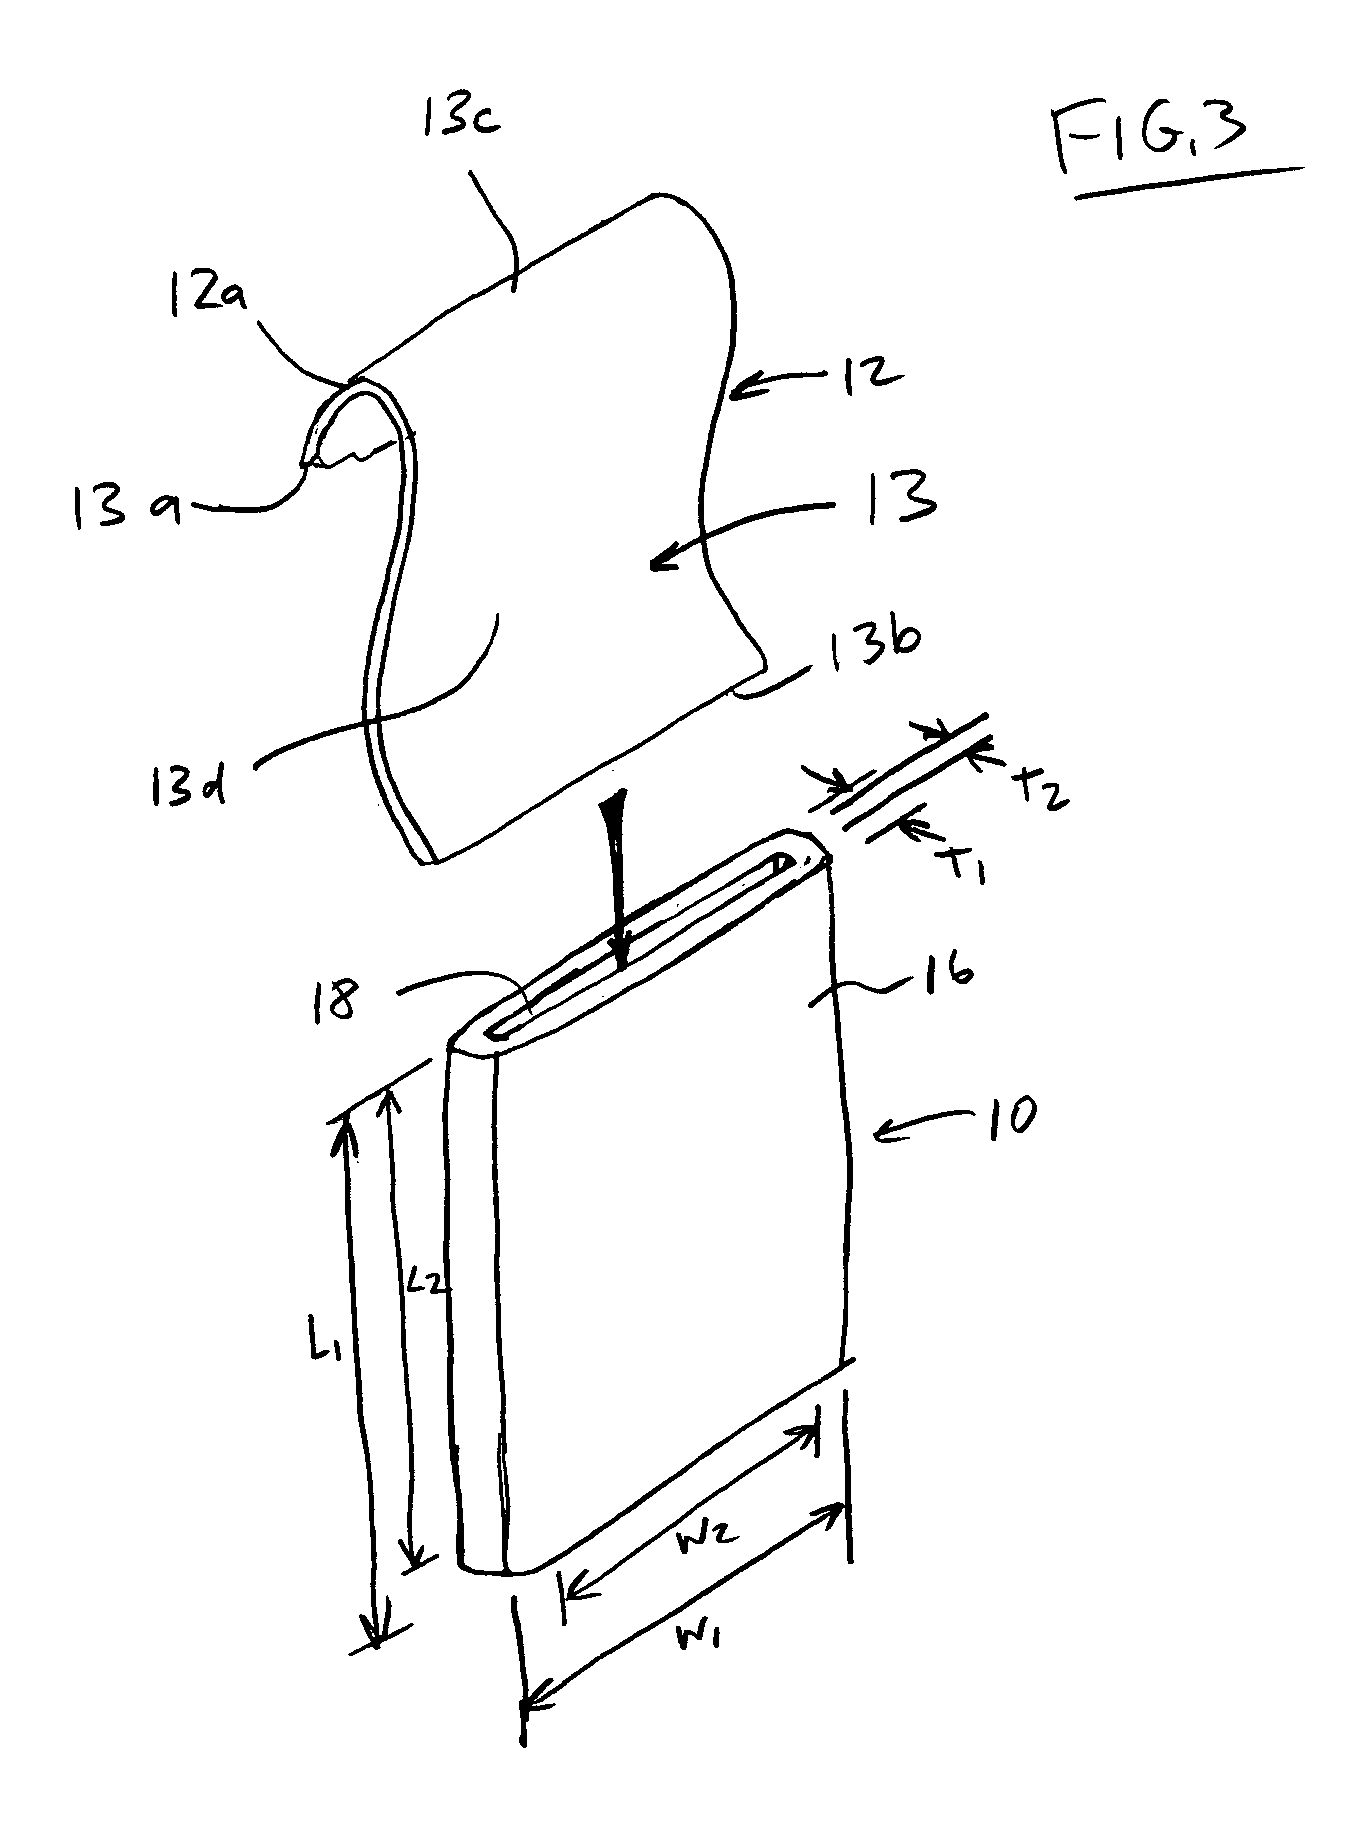 Protective cover for a hanging clip of a tape measure, knife, or other portable object